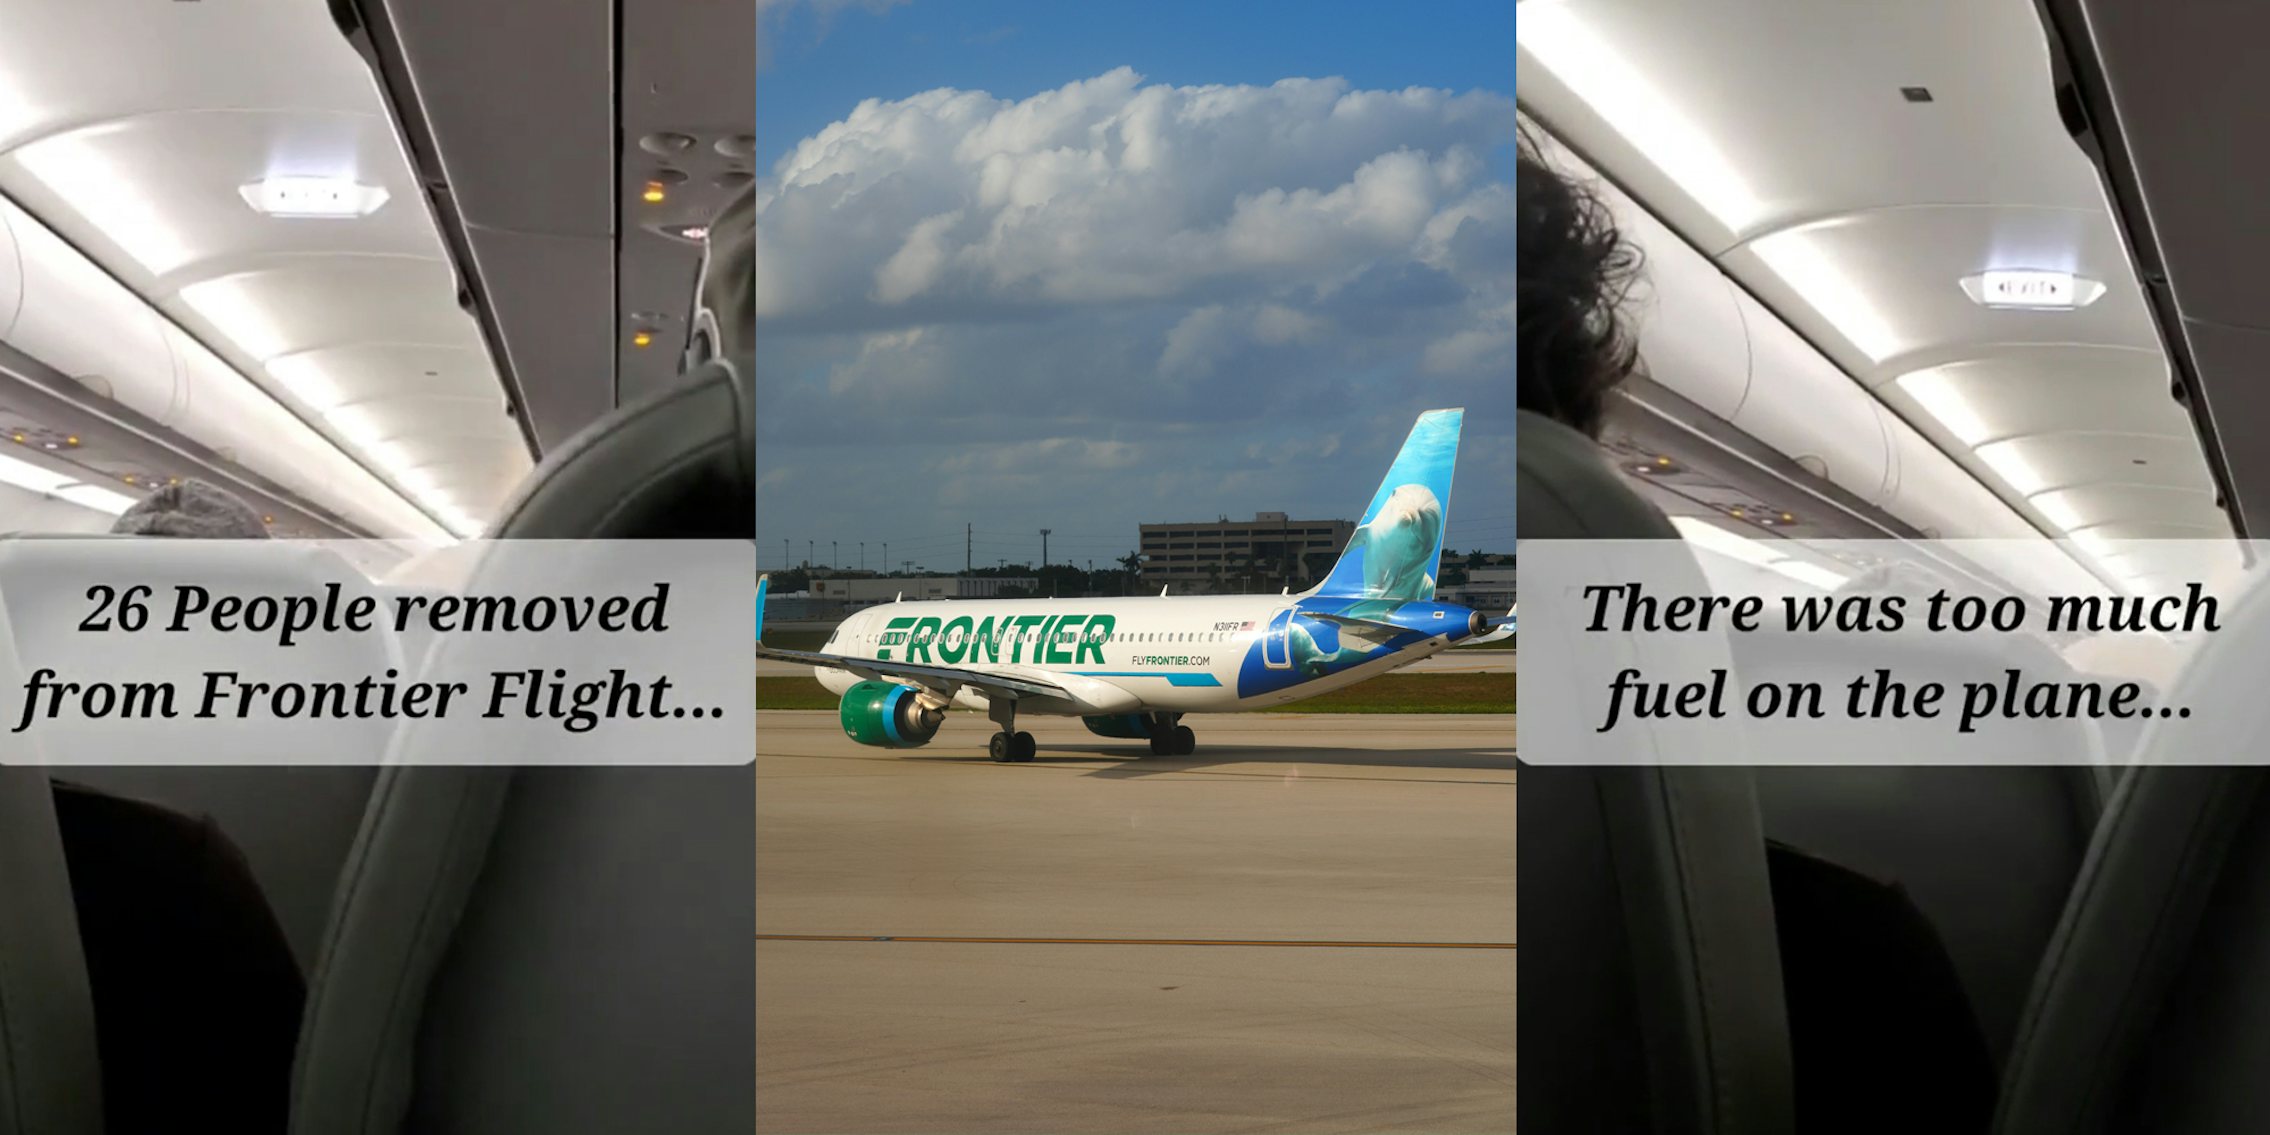 Frontier airlines pov of passenger with caption '26 people removed from Frontier Flight...' (l) Frontier airlines plane in runway (c) Frontier airlines pov of passenger with caption 'There was too much fuel on the plane' (r)